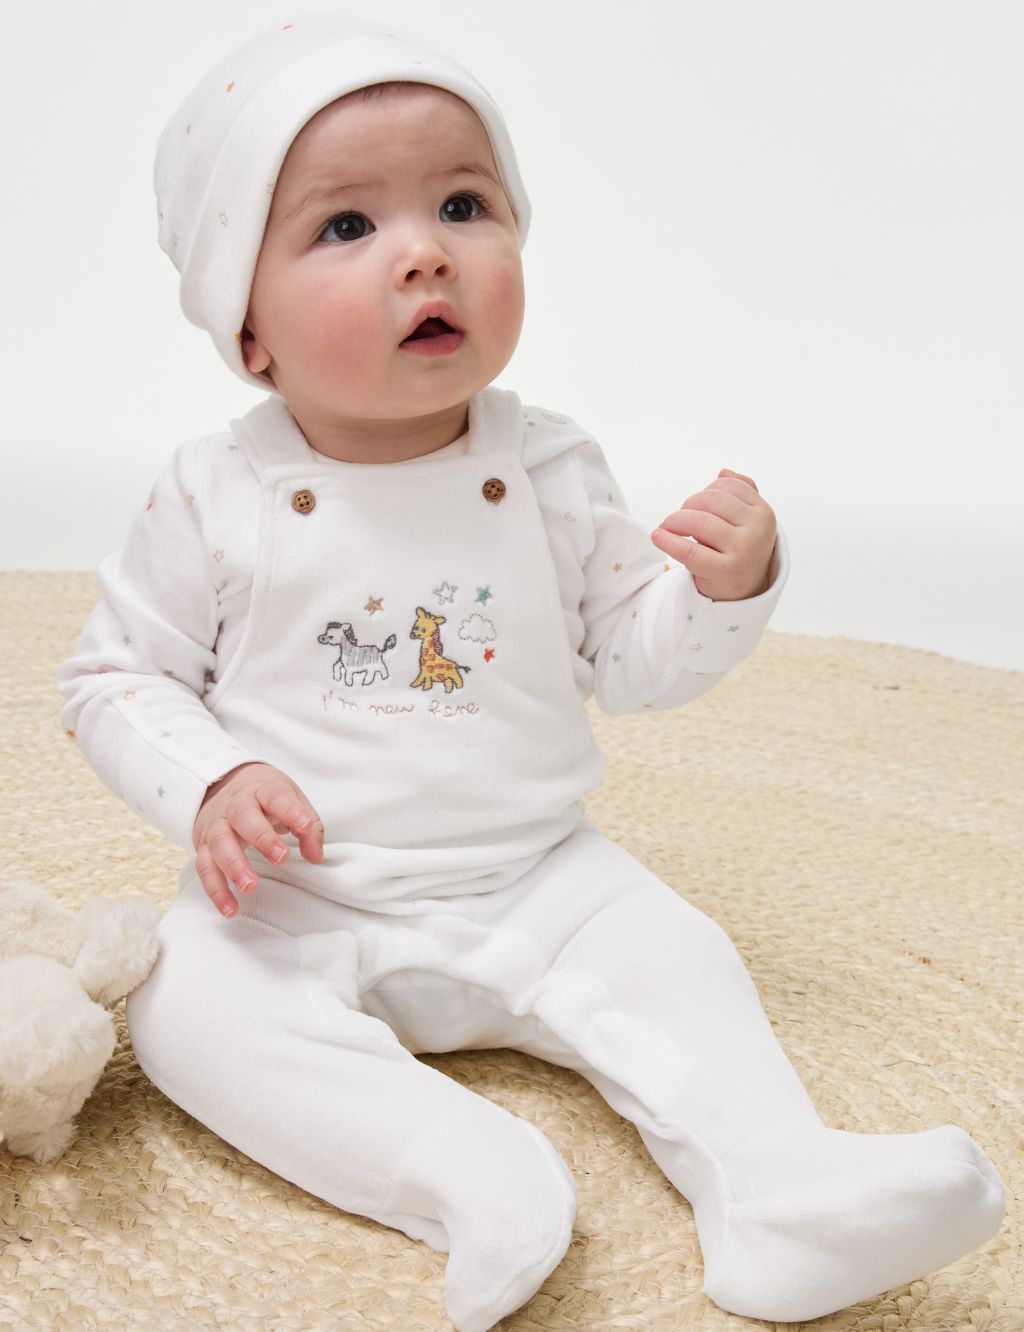 3pc Cotton Rich Animal & Stars Outfit (0-12 Mths)